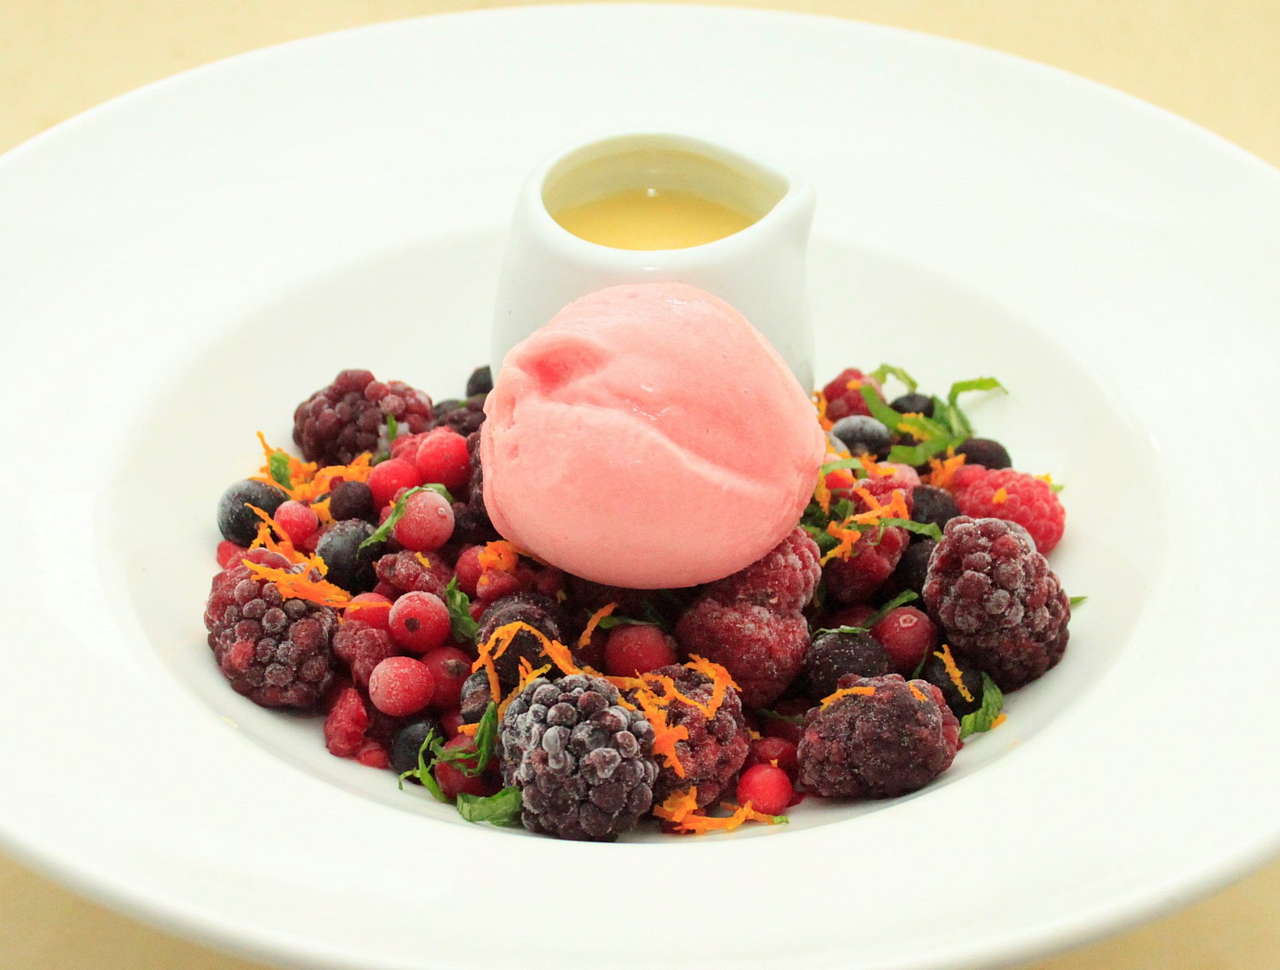 Frozen berries with white chocolate sauce